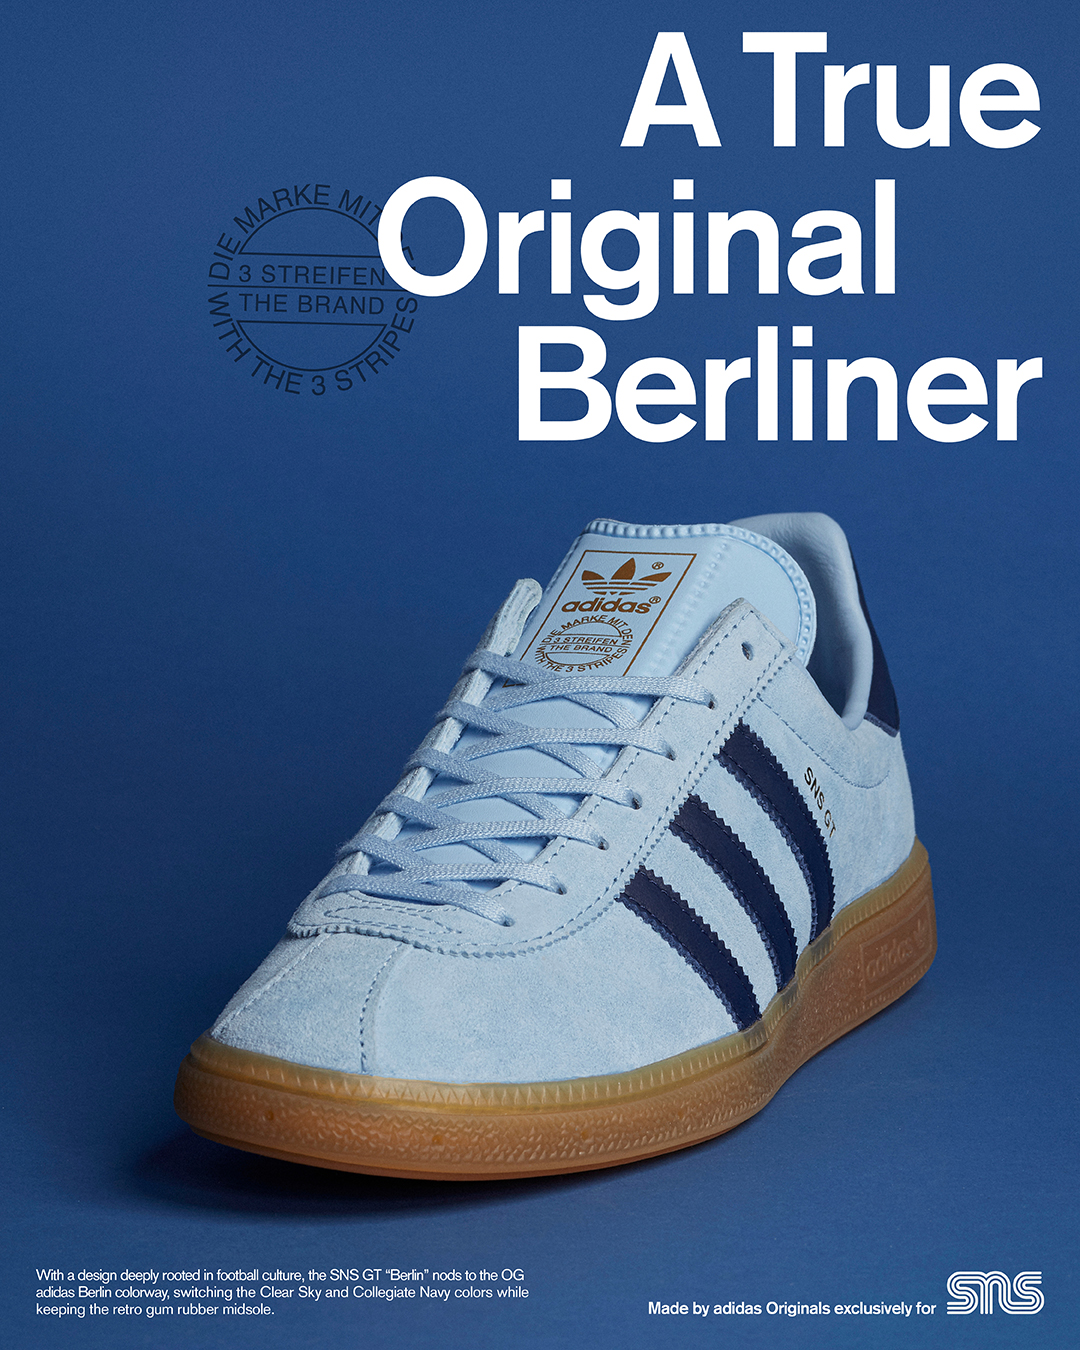 SNS on Twitter: "The adidas SNS GT "Berlin" design is deeply rooted football culture, with colorway nodding the OG adidas Berlin colorway. https://t.co/ofbNUrfxcX" / X